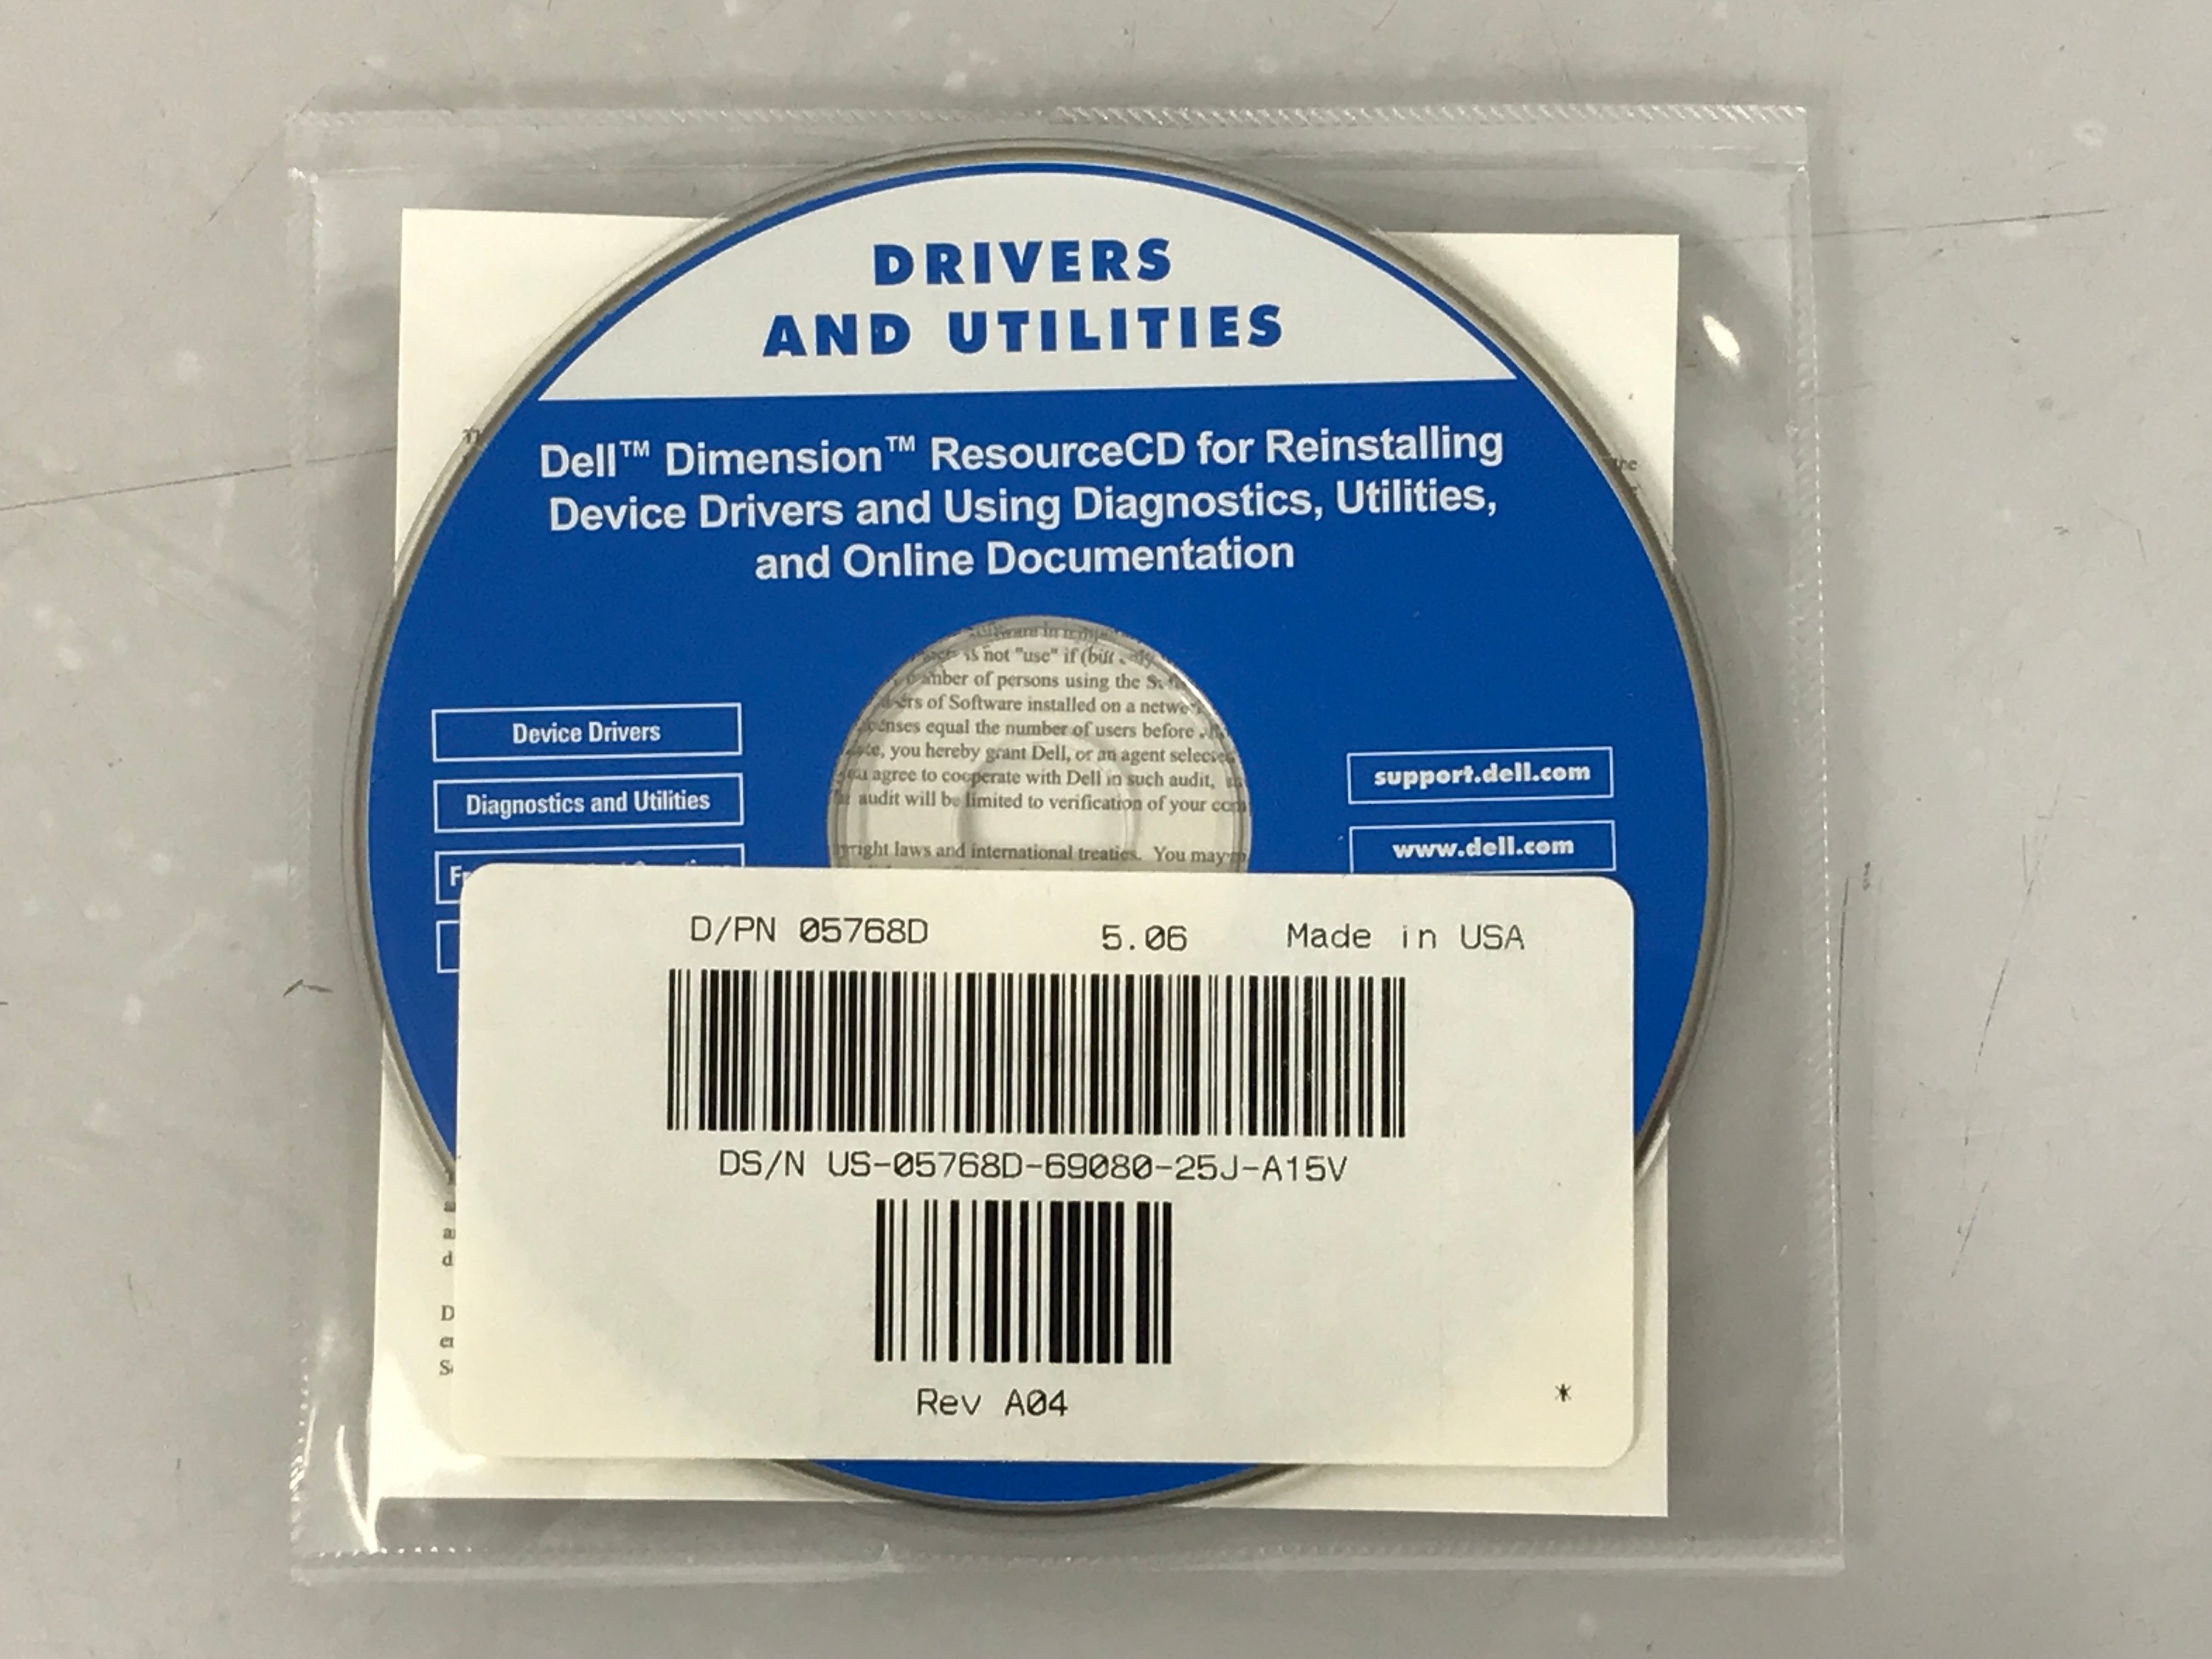 Dell Dimension ResourceCD Drivers and Utilities Disk